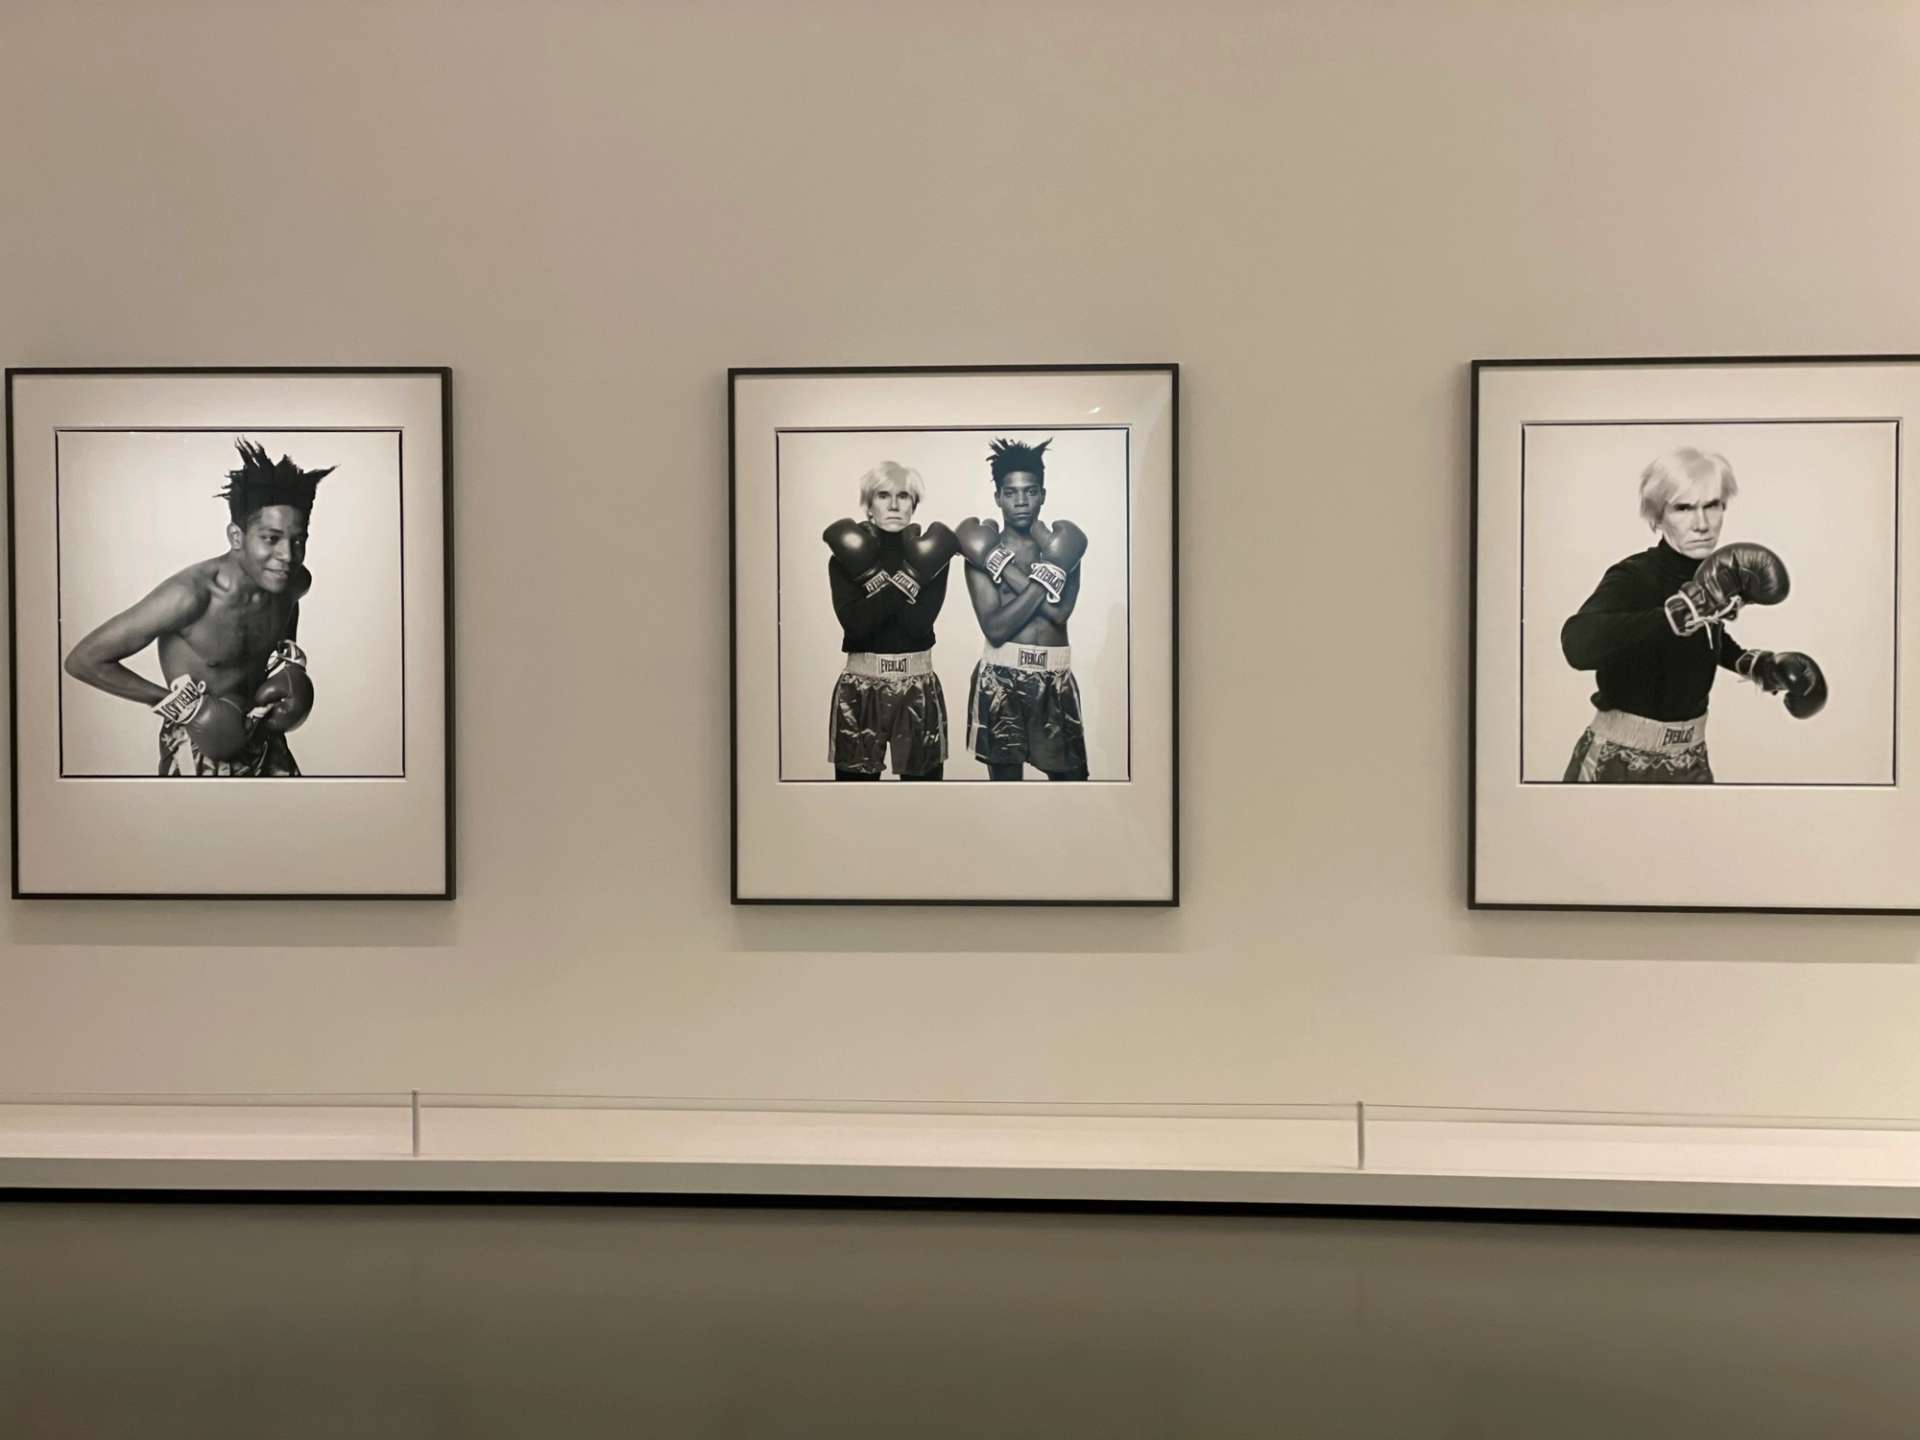 Three black and white photographs of Andy Warhol and Jean-Michele Basquiat